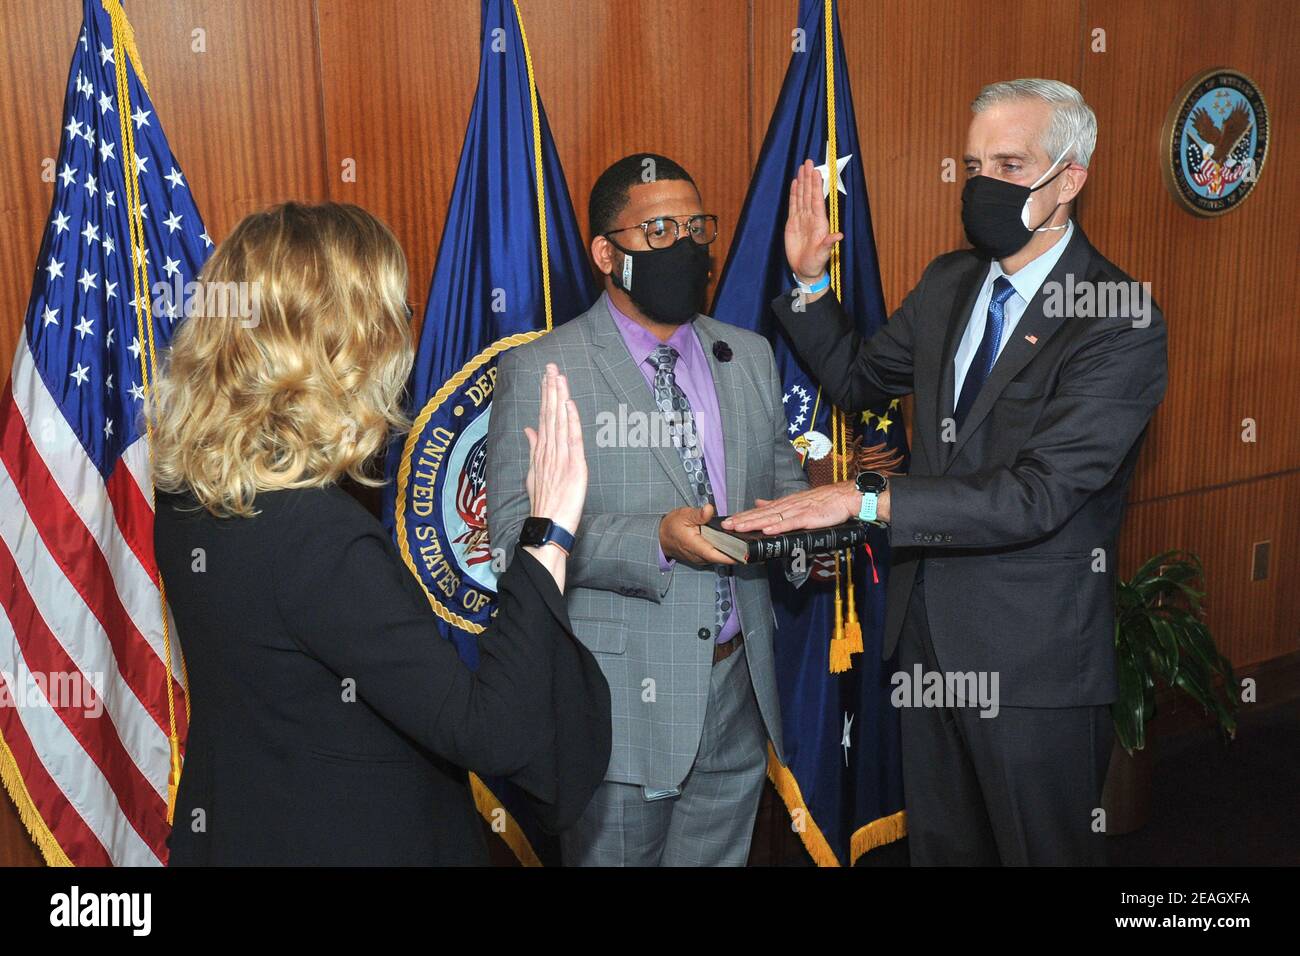 Washington, United States Of America. 09th Feb, 2021. U.S. Secretary of Veterans Affairs Denis McDonough, right, is sworn in following his confirmation by the Senate during a ceremony at the Veterans Affairs headquarters February 9, 2021 in Washington, DC. Credit: Planetpix/Alamy Live News Stock Photo